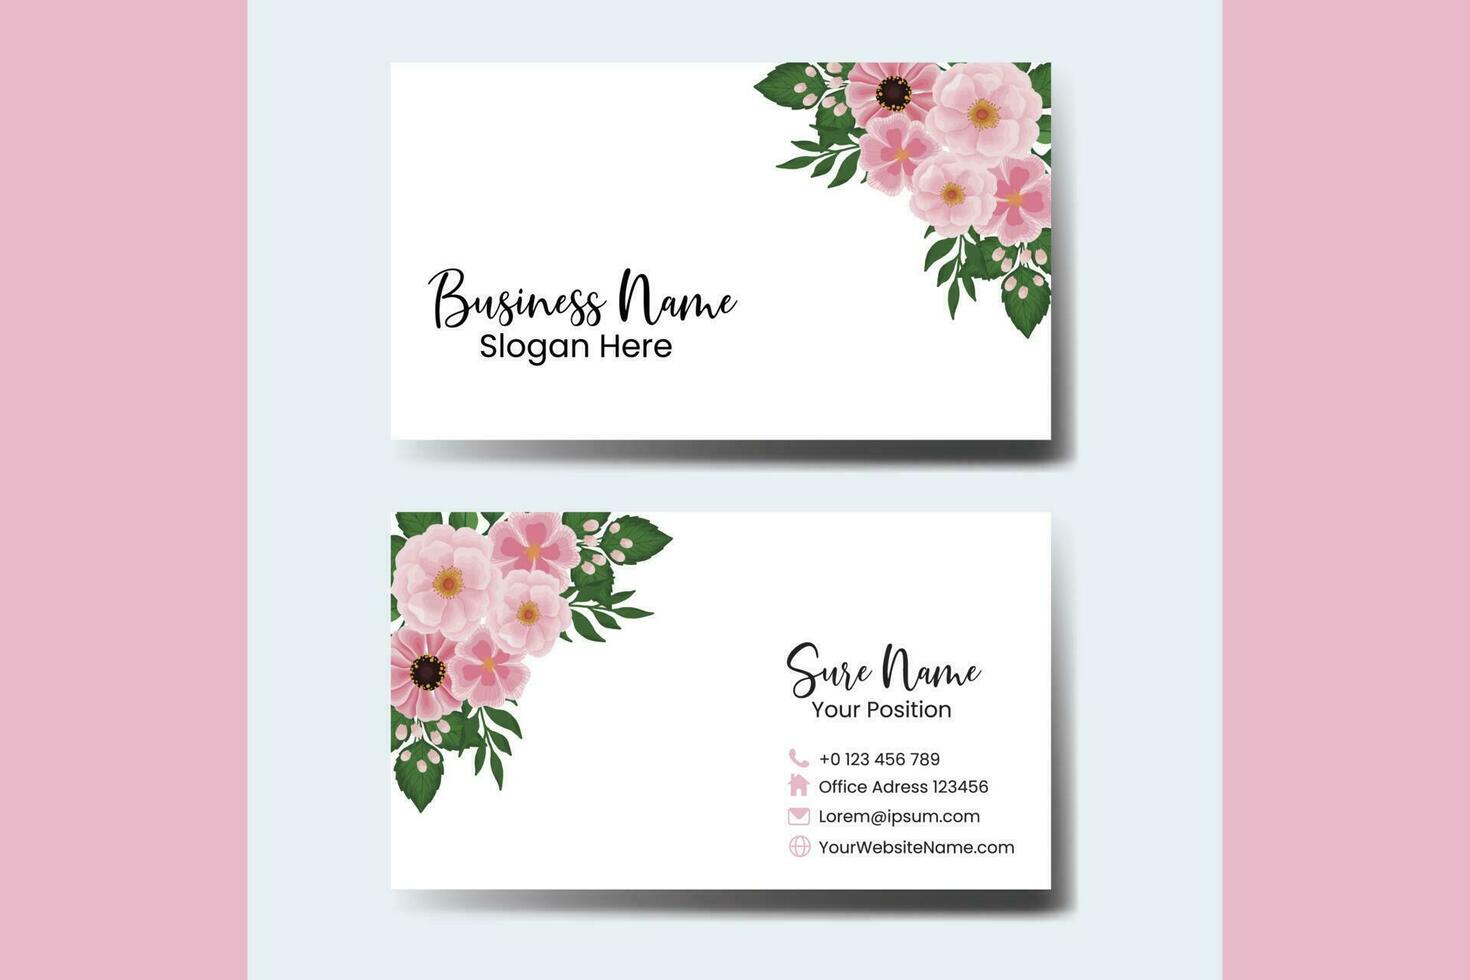 Business Card Template Pink Flower .Double-sided Blue Colors. Flat Design Vector Illustration. Stationery Design